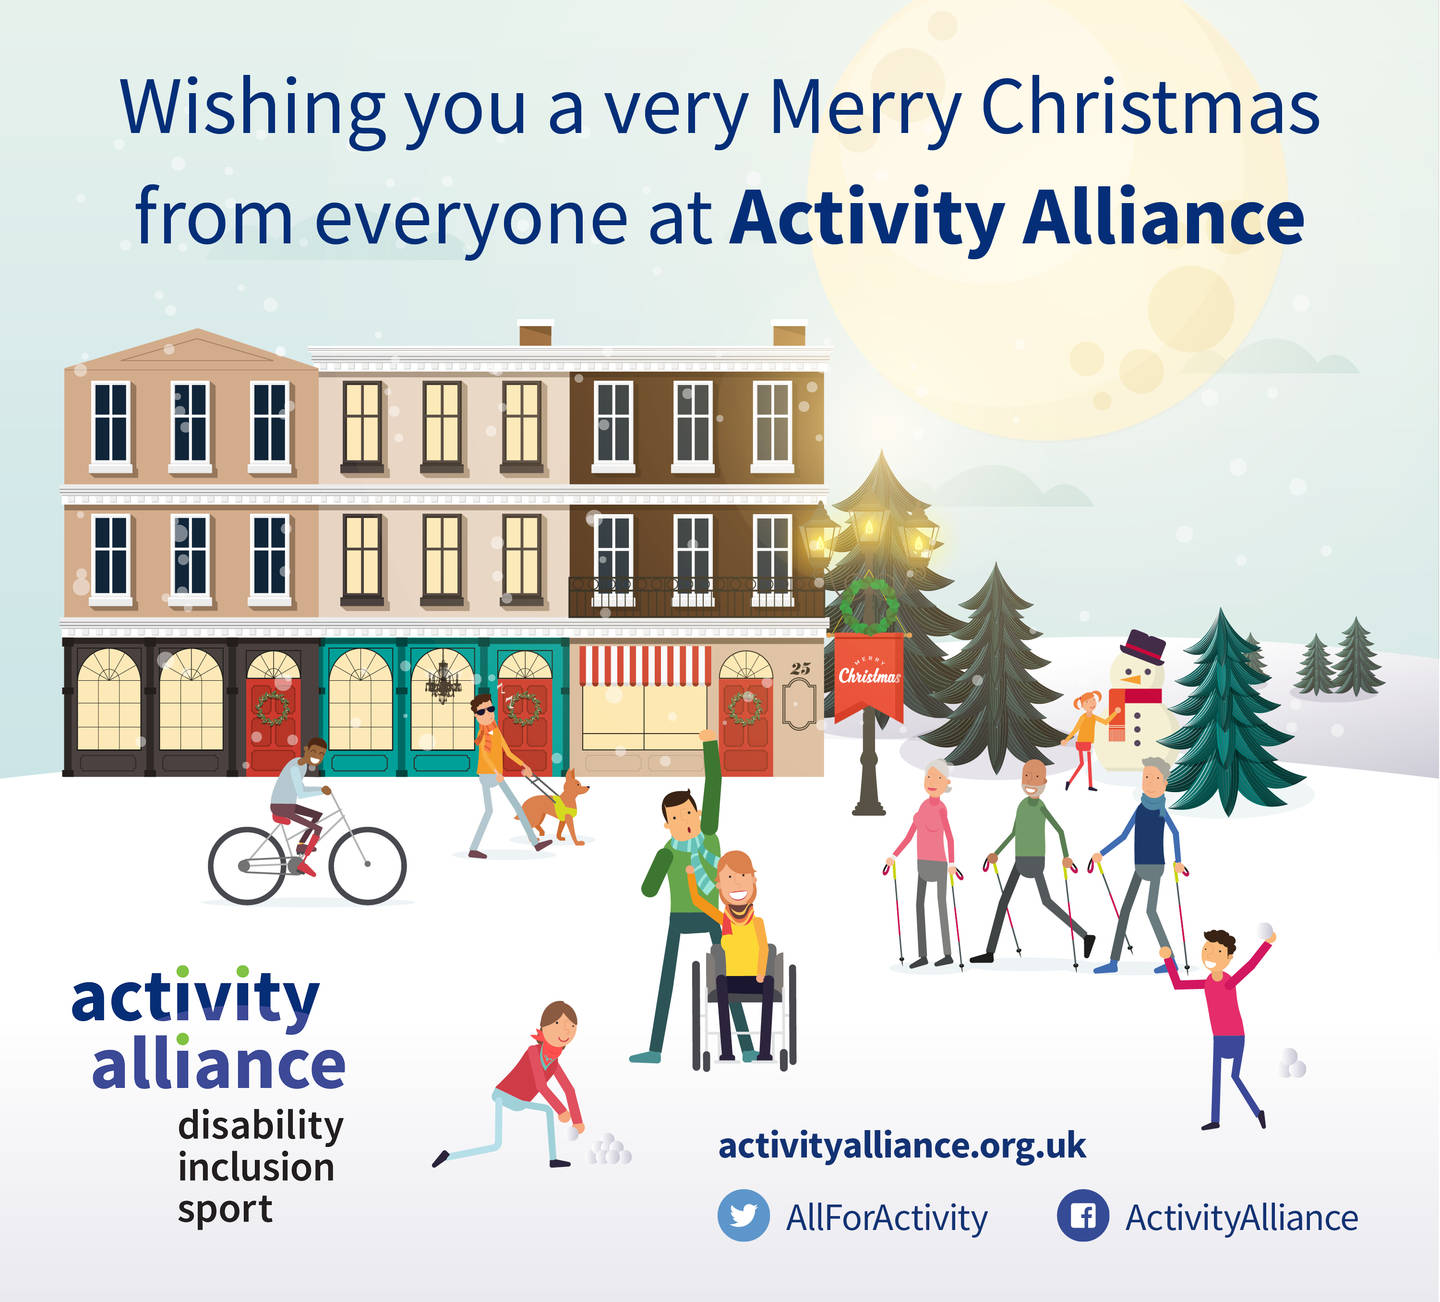 A Christmas illustration of people enjoying inclusive activity 